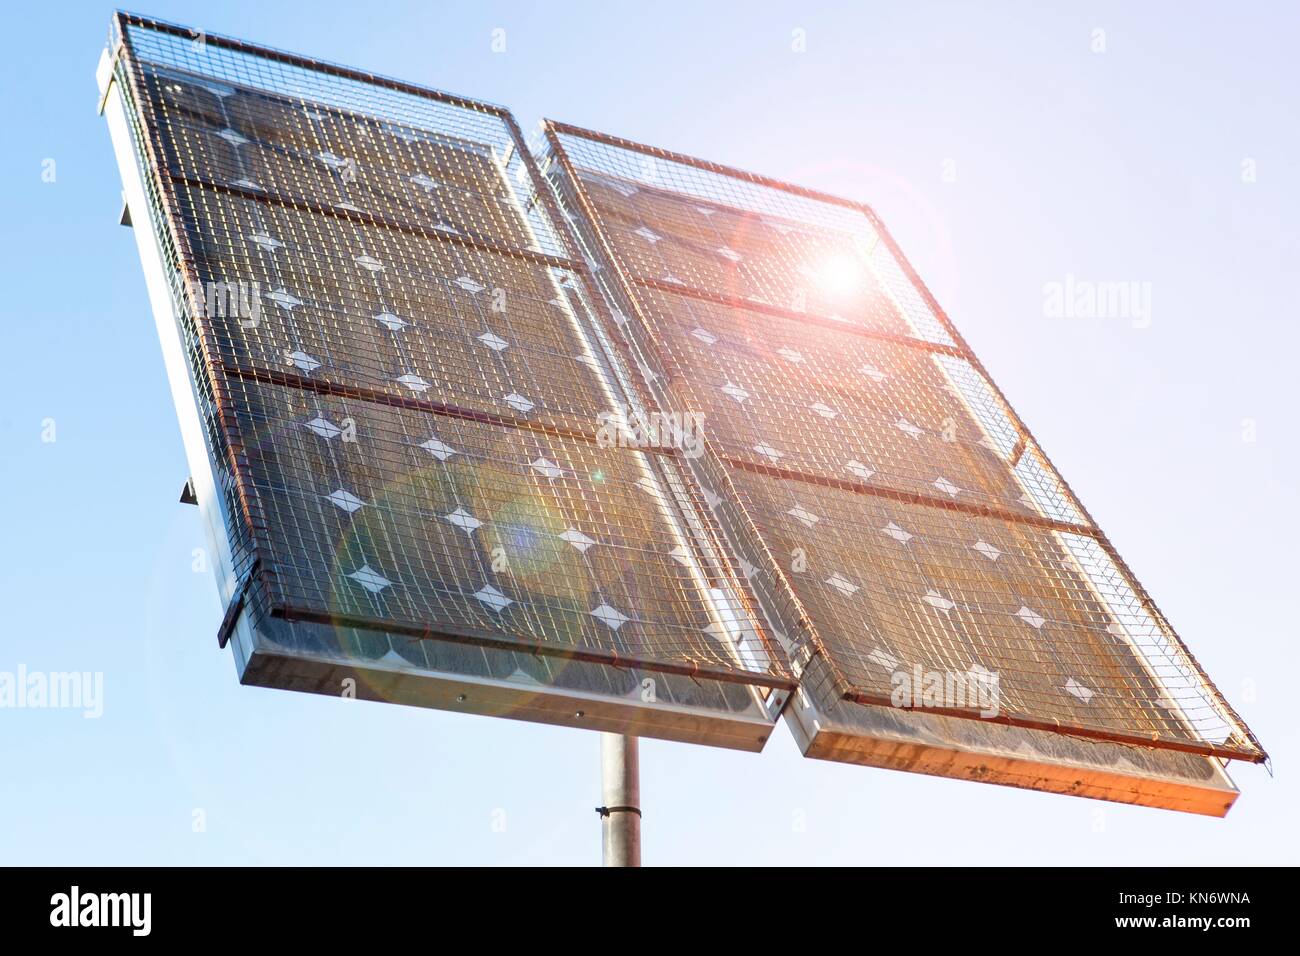 Solar panel installed in the top of a pole protected with wire netting and illuminated with sun sparkles. Stock Photo